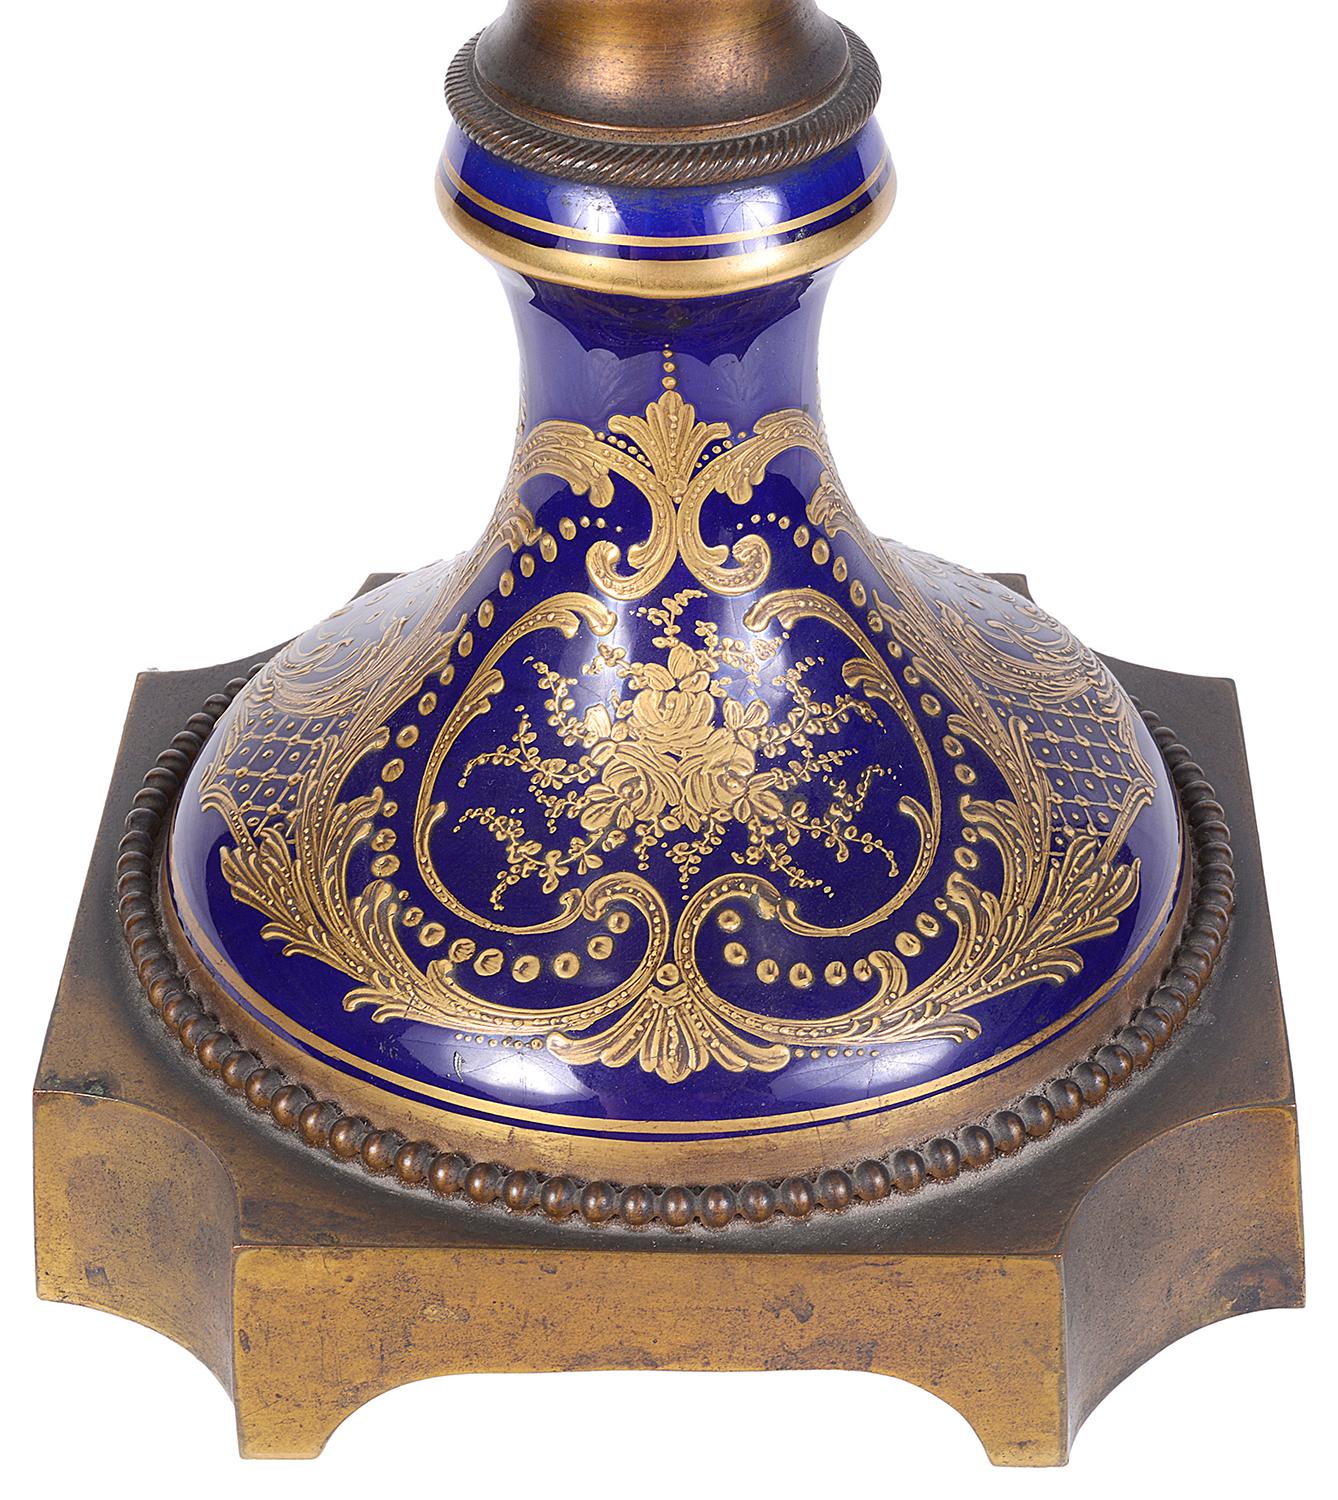 A good quality 19th Century French Sevres porcelain lidded vase, having gilded ormolu finial and handles, cobalt blue ground with gilded scrolling decoration. The central painted panel depicting a romantic scene to the front and children playing to